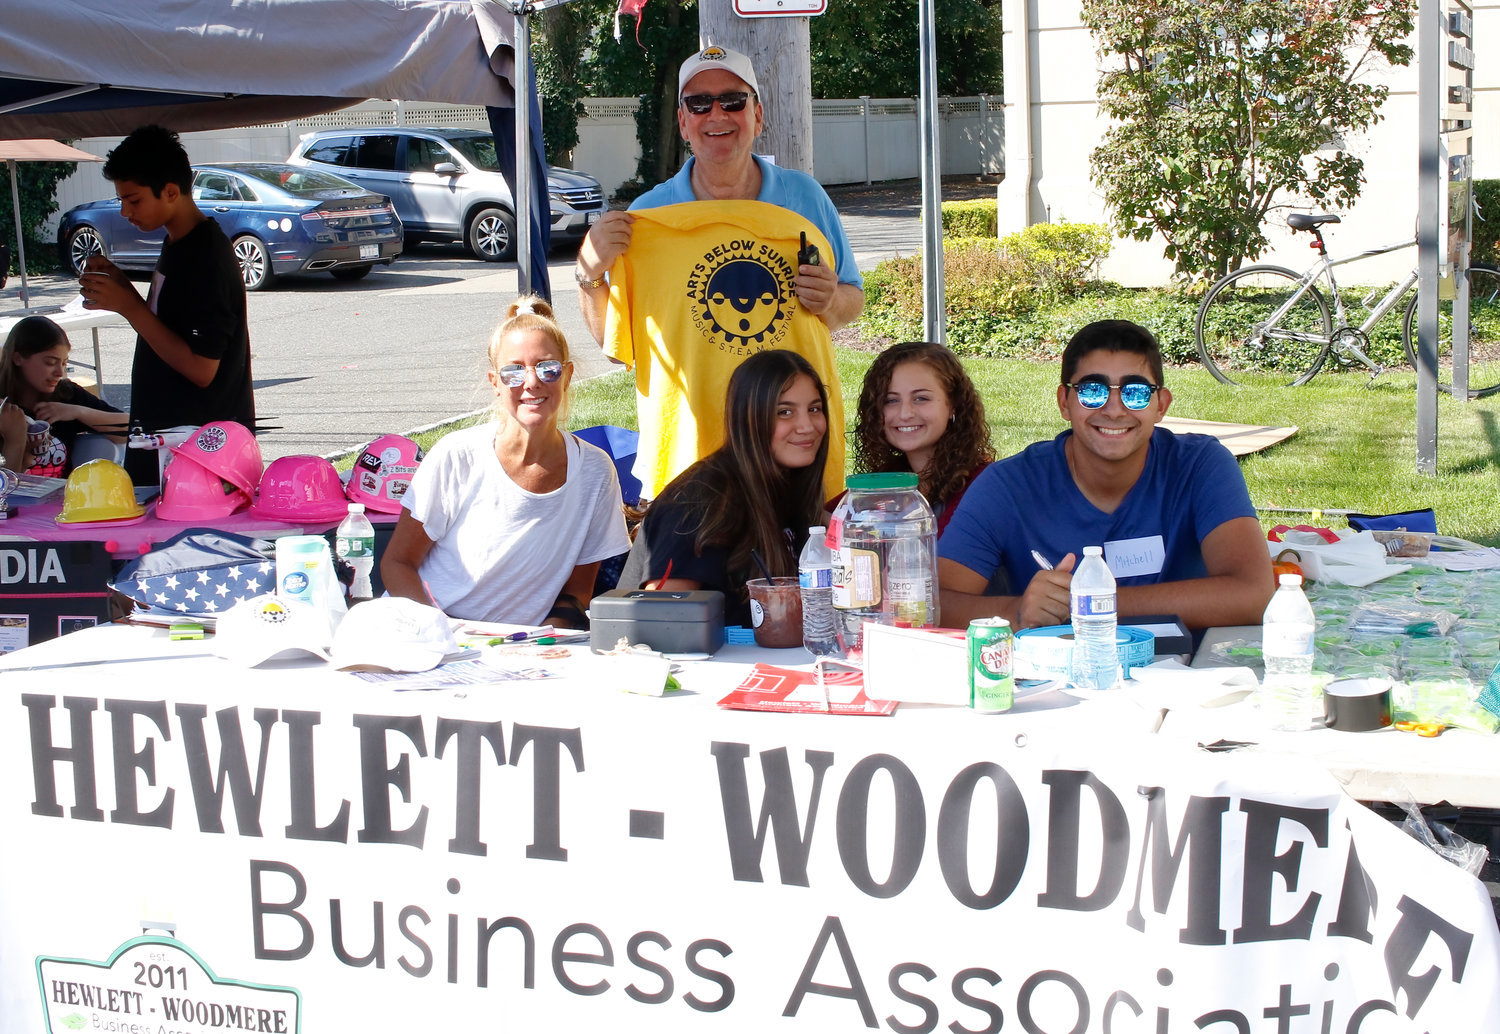 In 2019, the Hewlett Woodmere Business Association table was staffed by from left, Linda Kreisman, David Friedman, Izzy Diglio, Kailey Kshonz and Mitchell Shemtov.